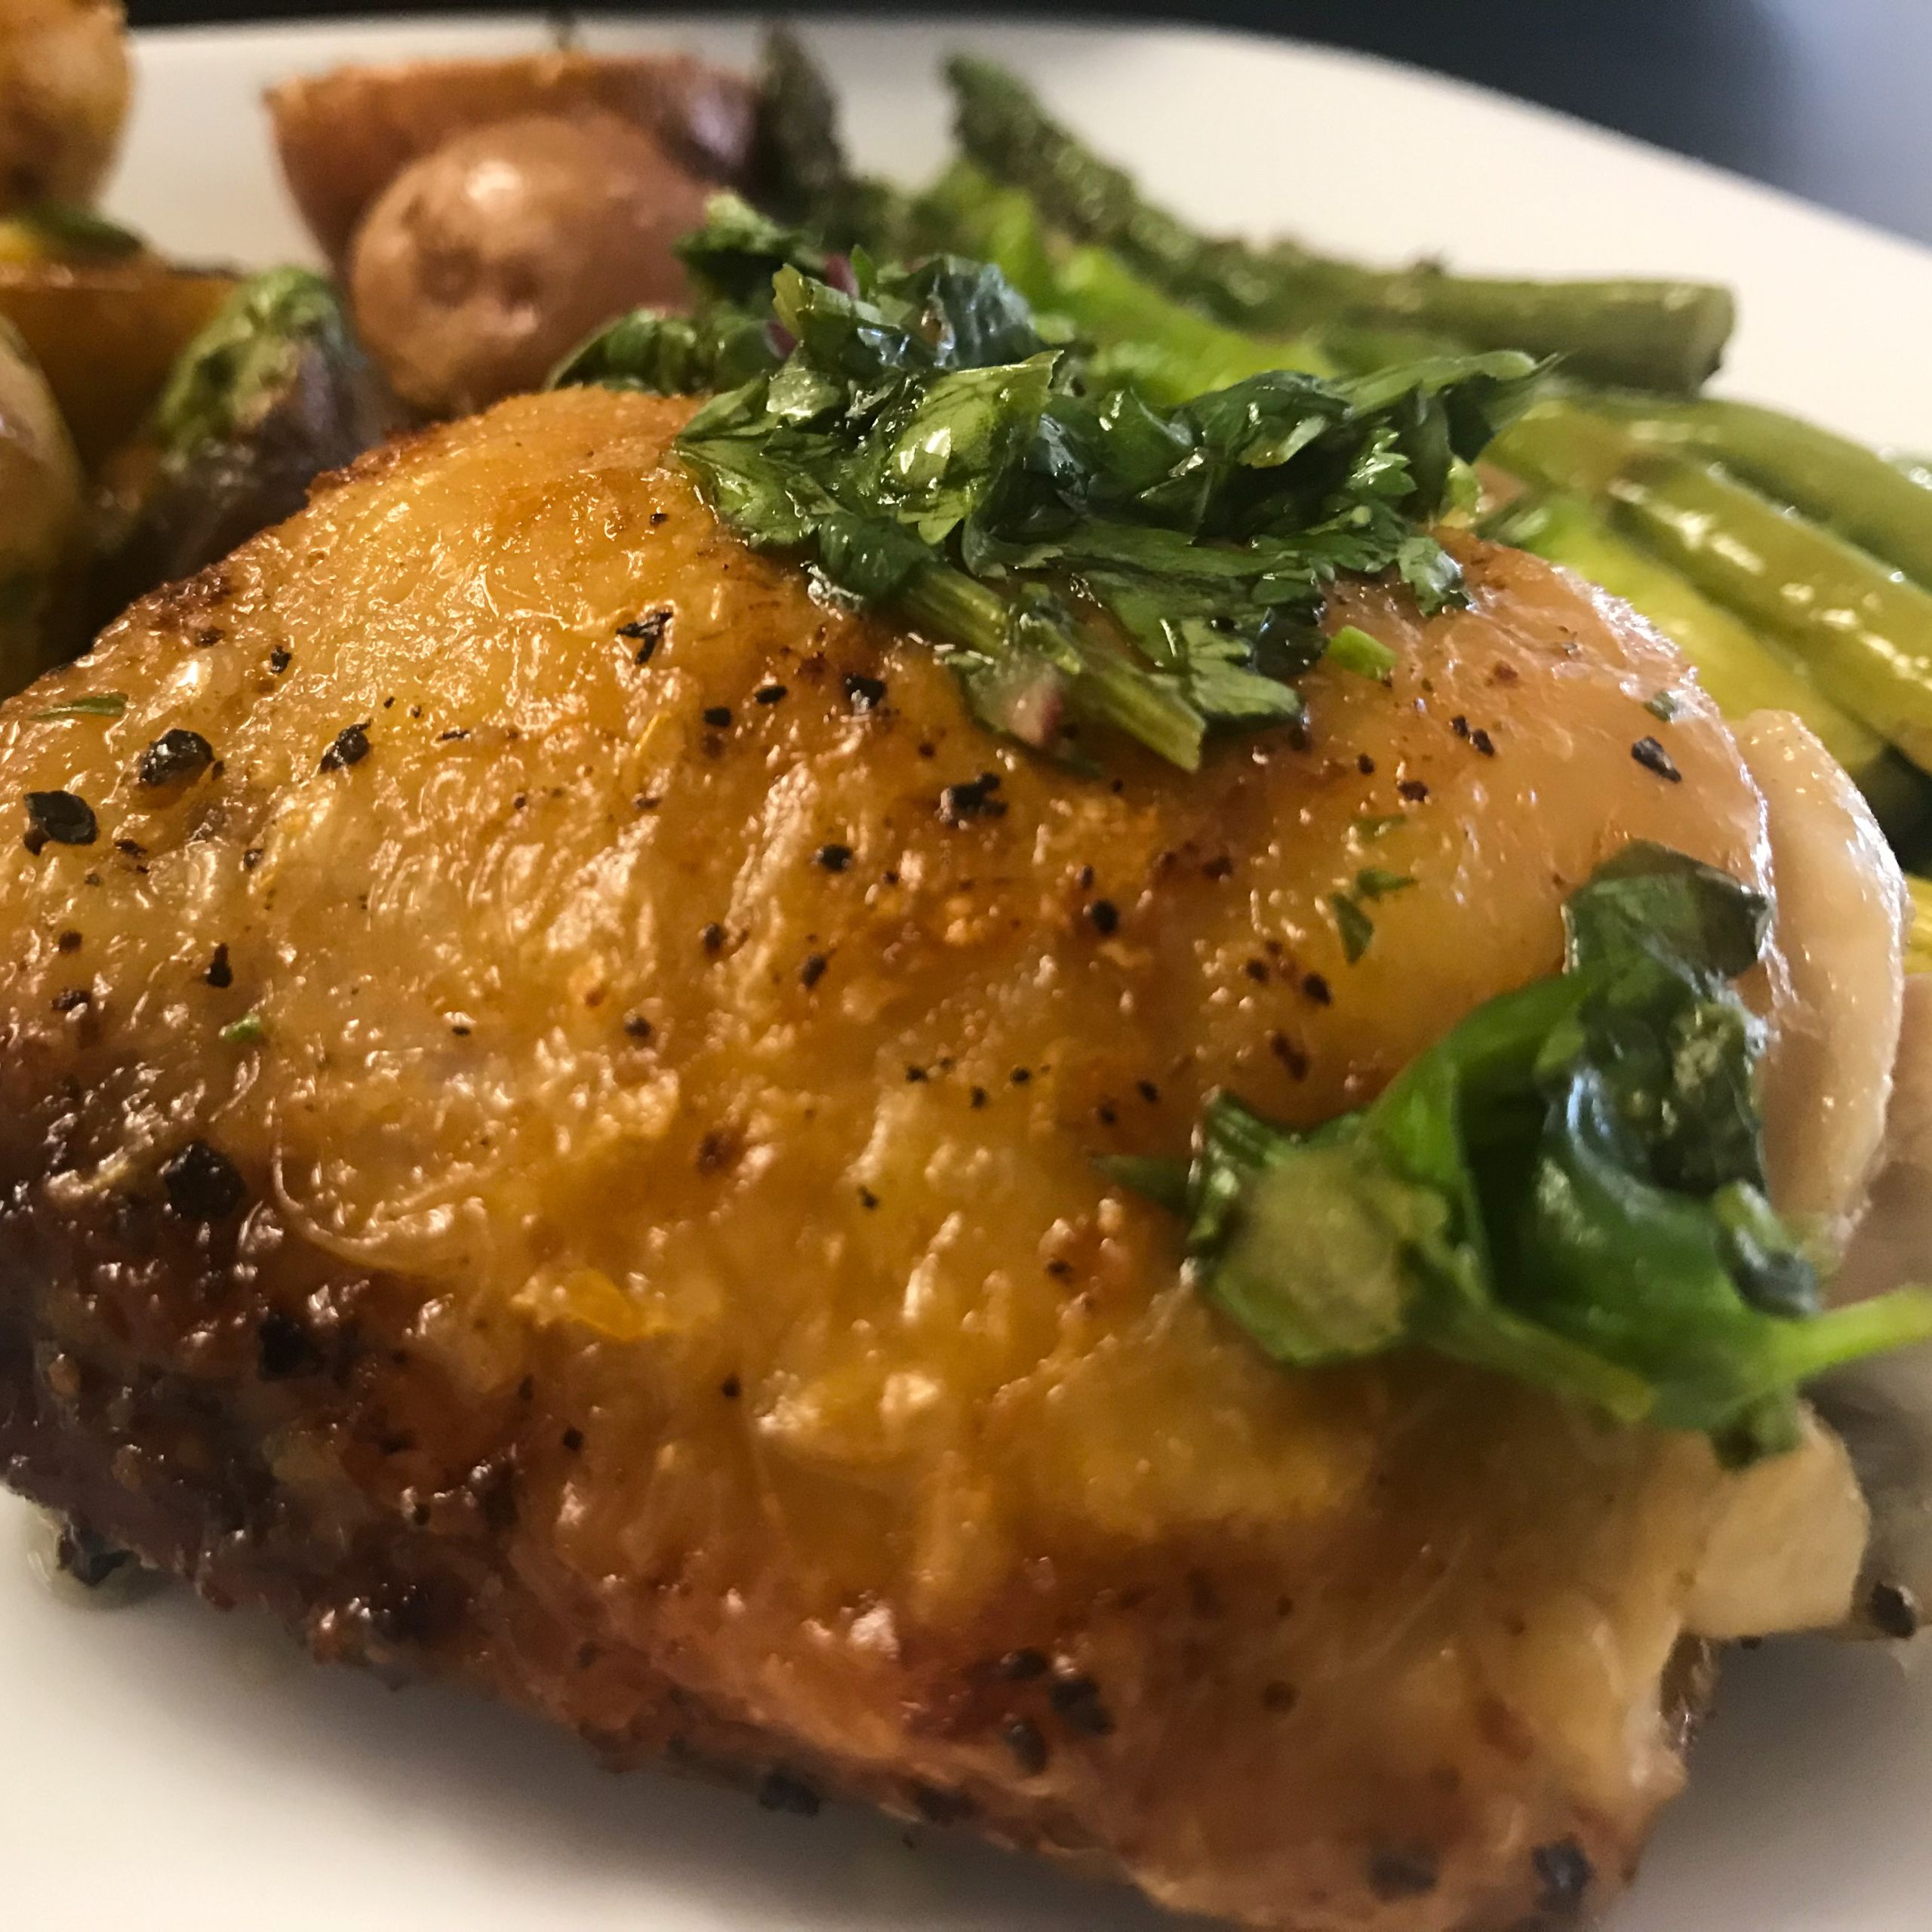 chicken thigh and potatoes and asparagus on a plate | My Curated Tastes